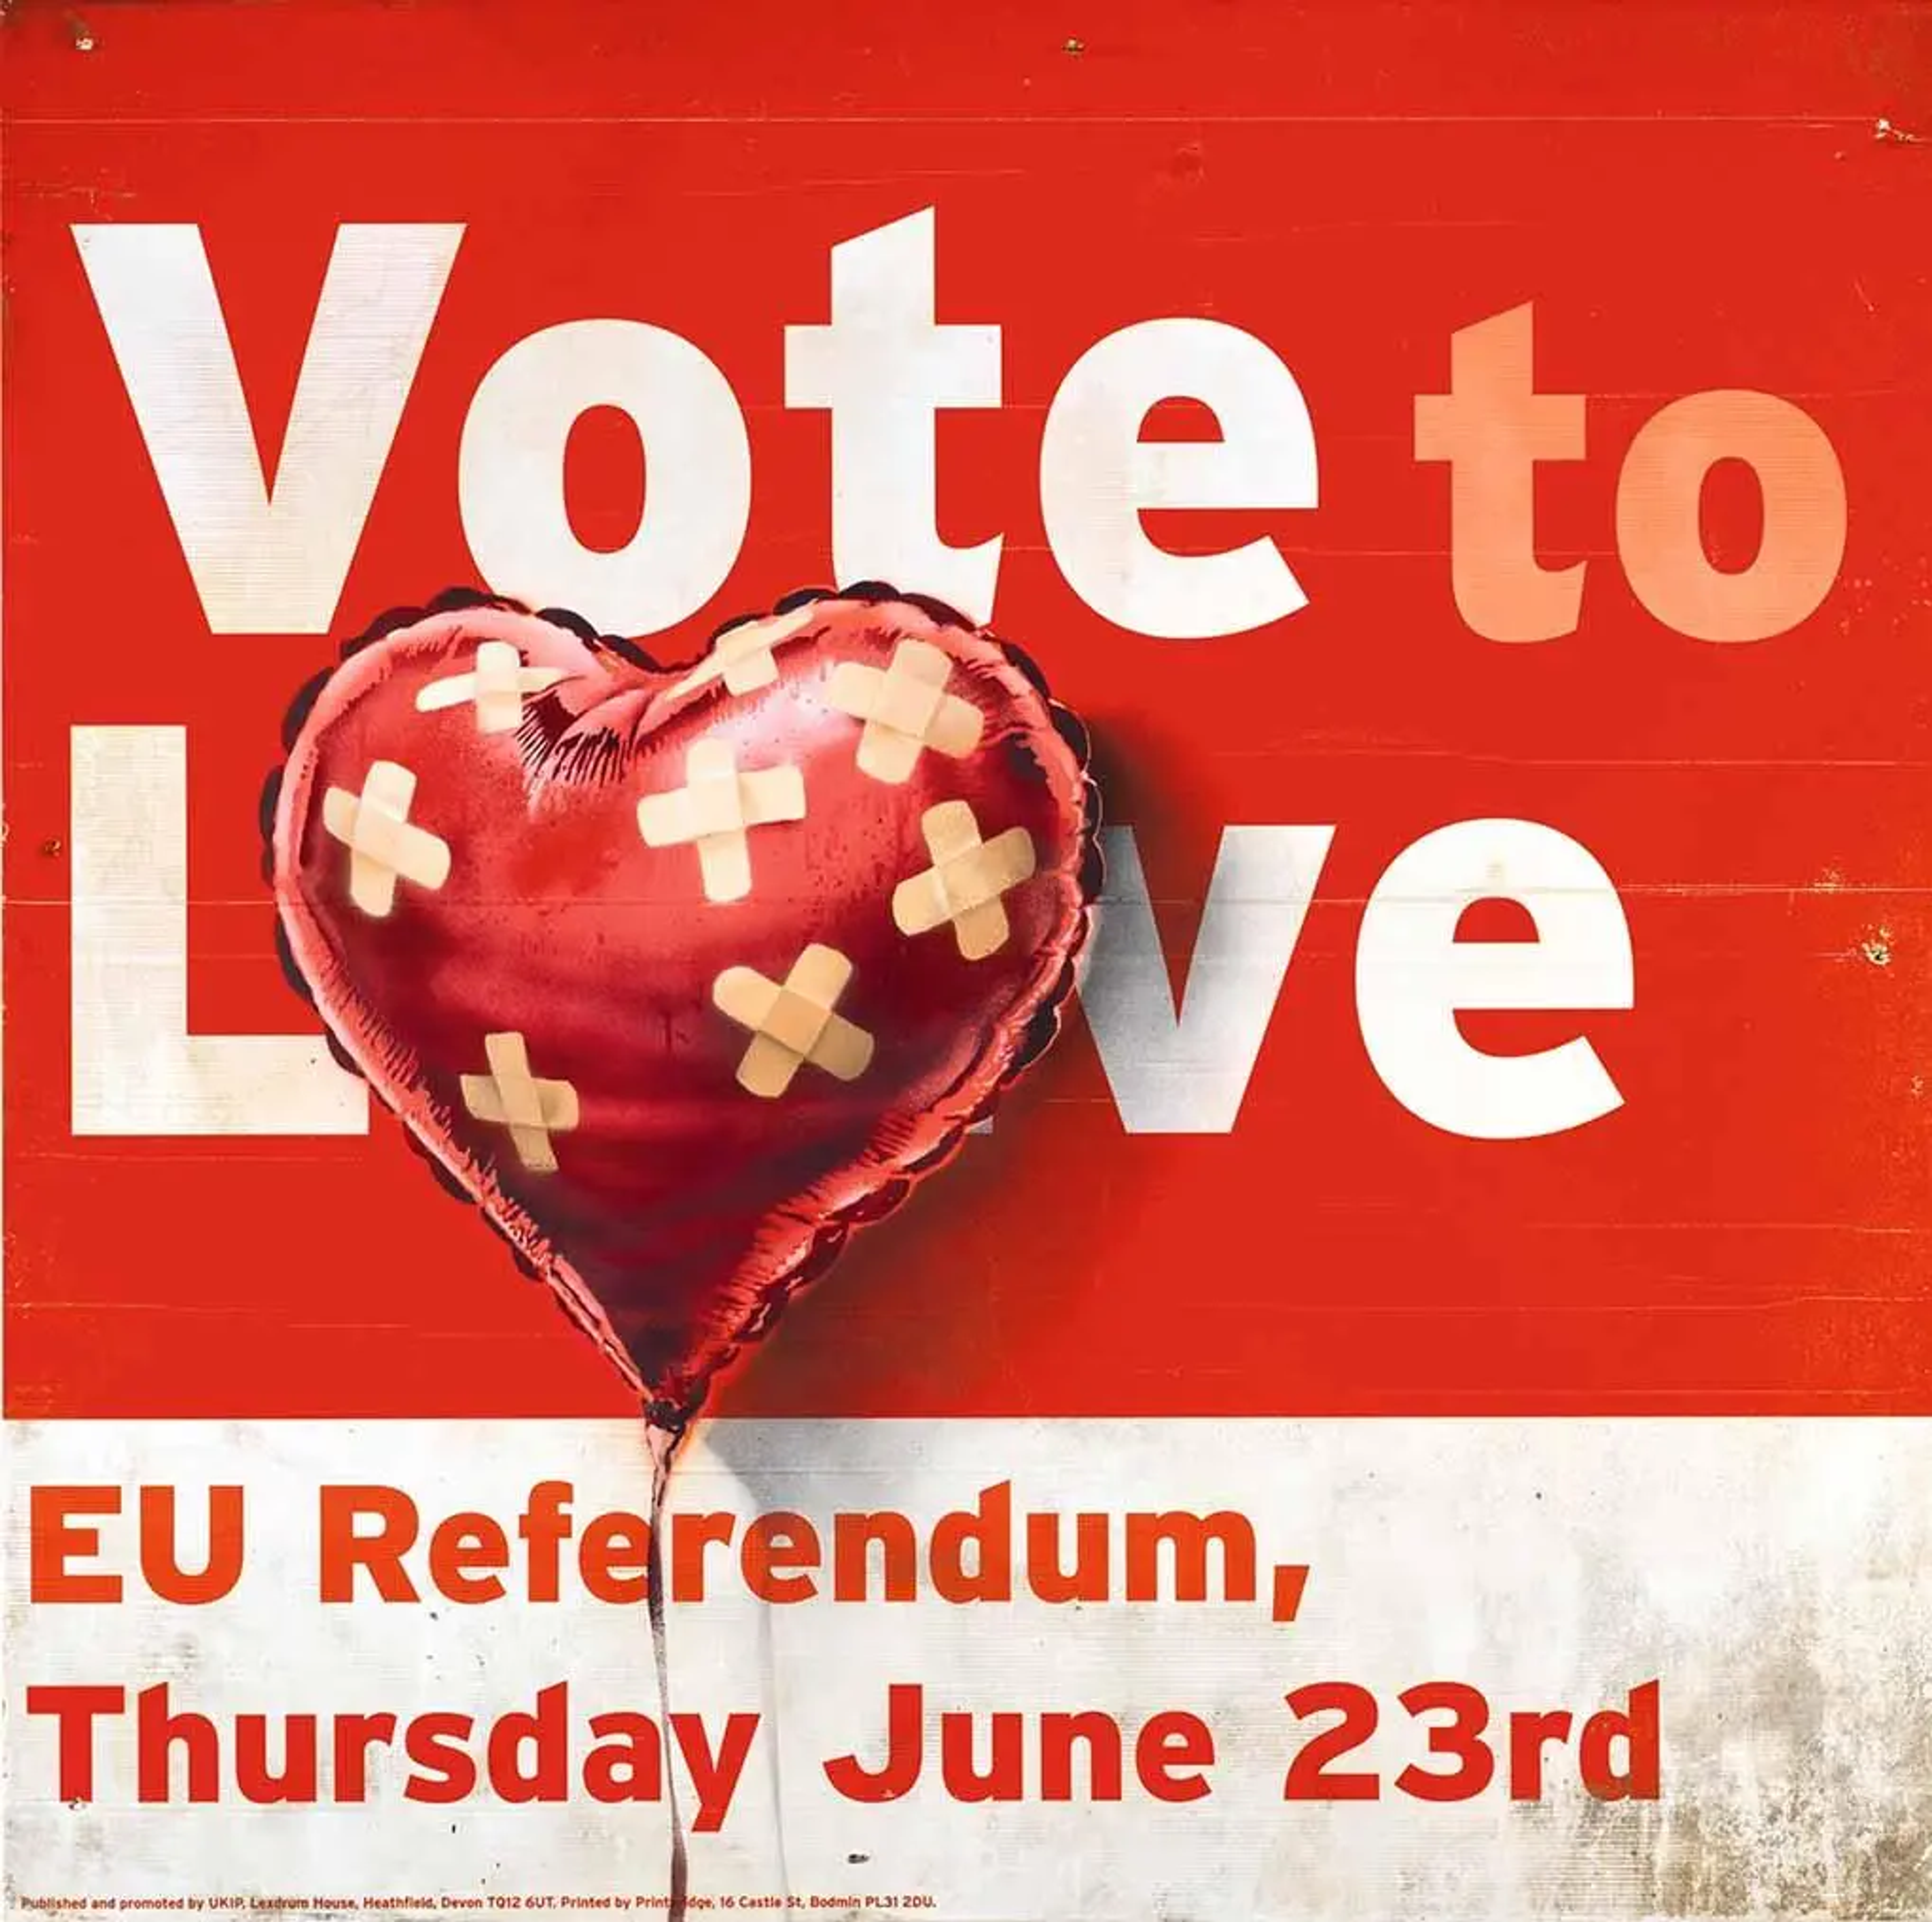 Vote To Love (2018) is a signed spray painting on UPIK placard mounted on board. Patched with sticking plasters, a heart-shaped balloon occupies a central position in the work, turning the political slogan ‘Vote to Leave’ into ‘Vote to Love’.